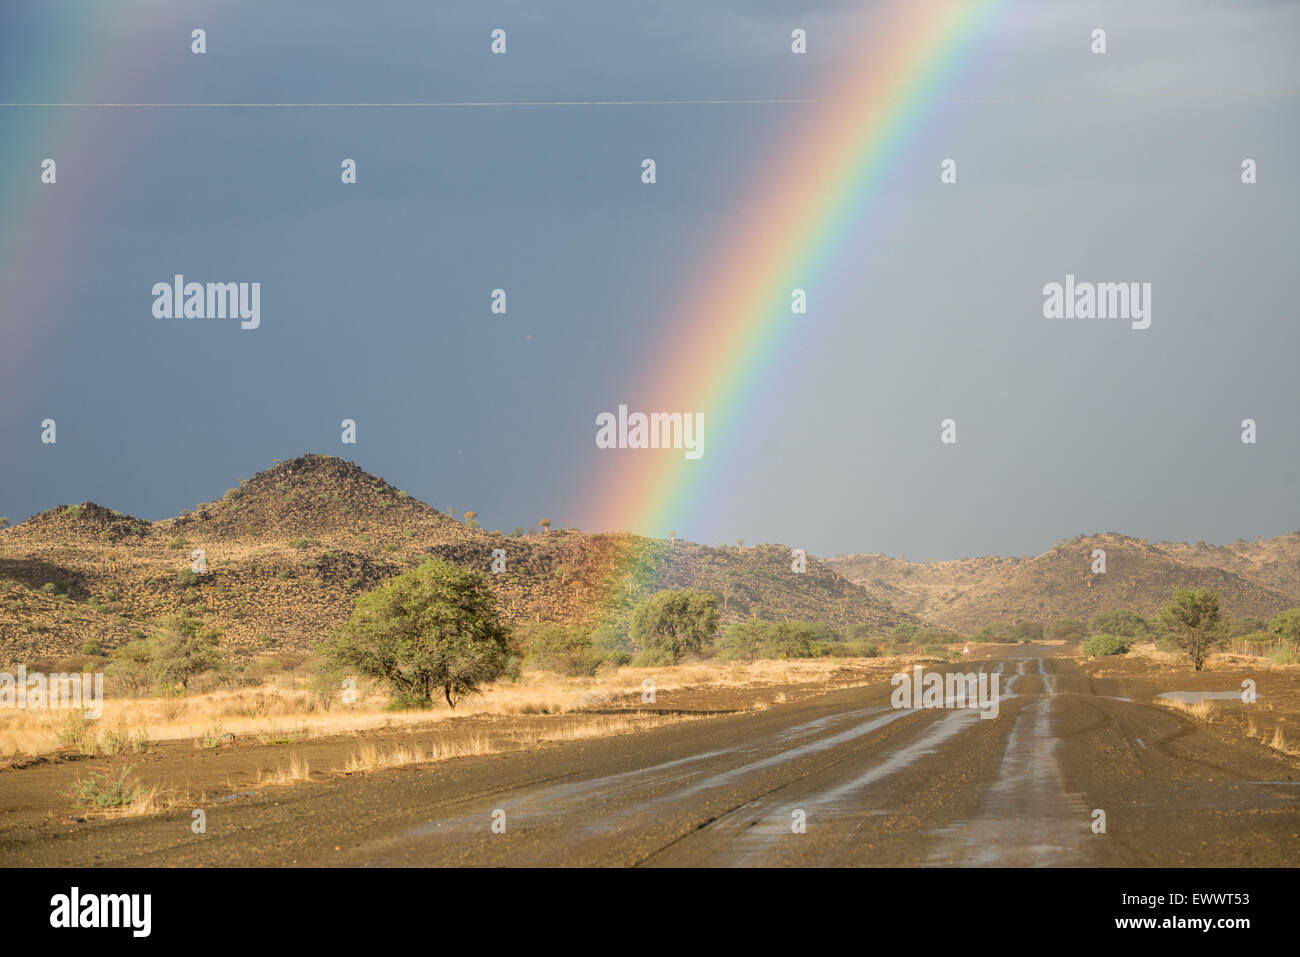 Keetmanshoop, Namibia, Africa - Rainbow in the sky over dry landscape Stock Photo